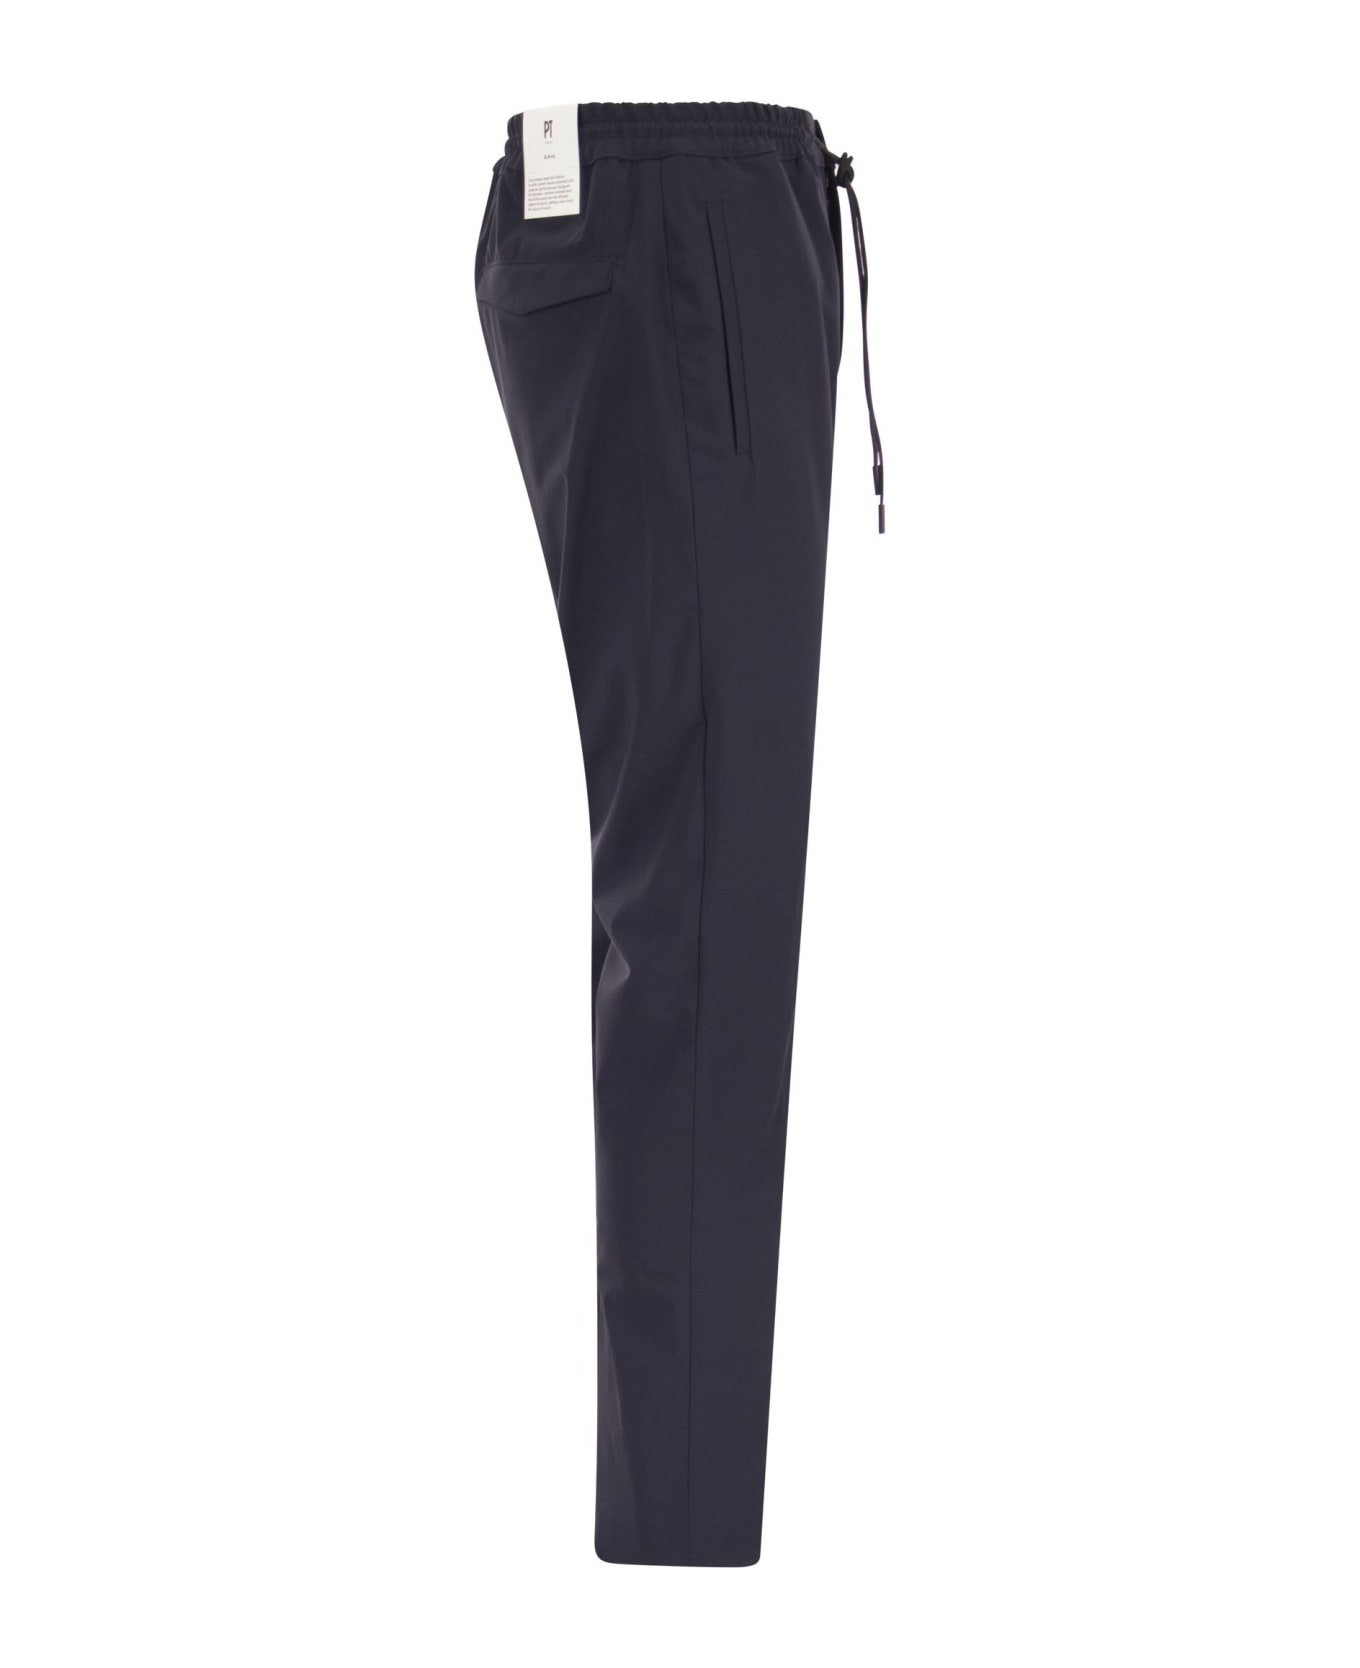 PT Torino 'omega' Trousers In Technical Fabric - Navy ボトムス